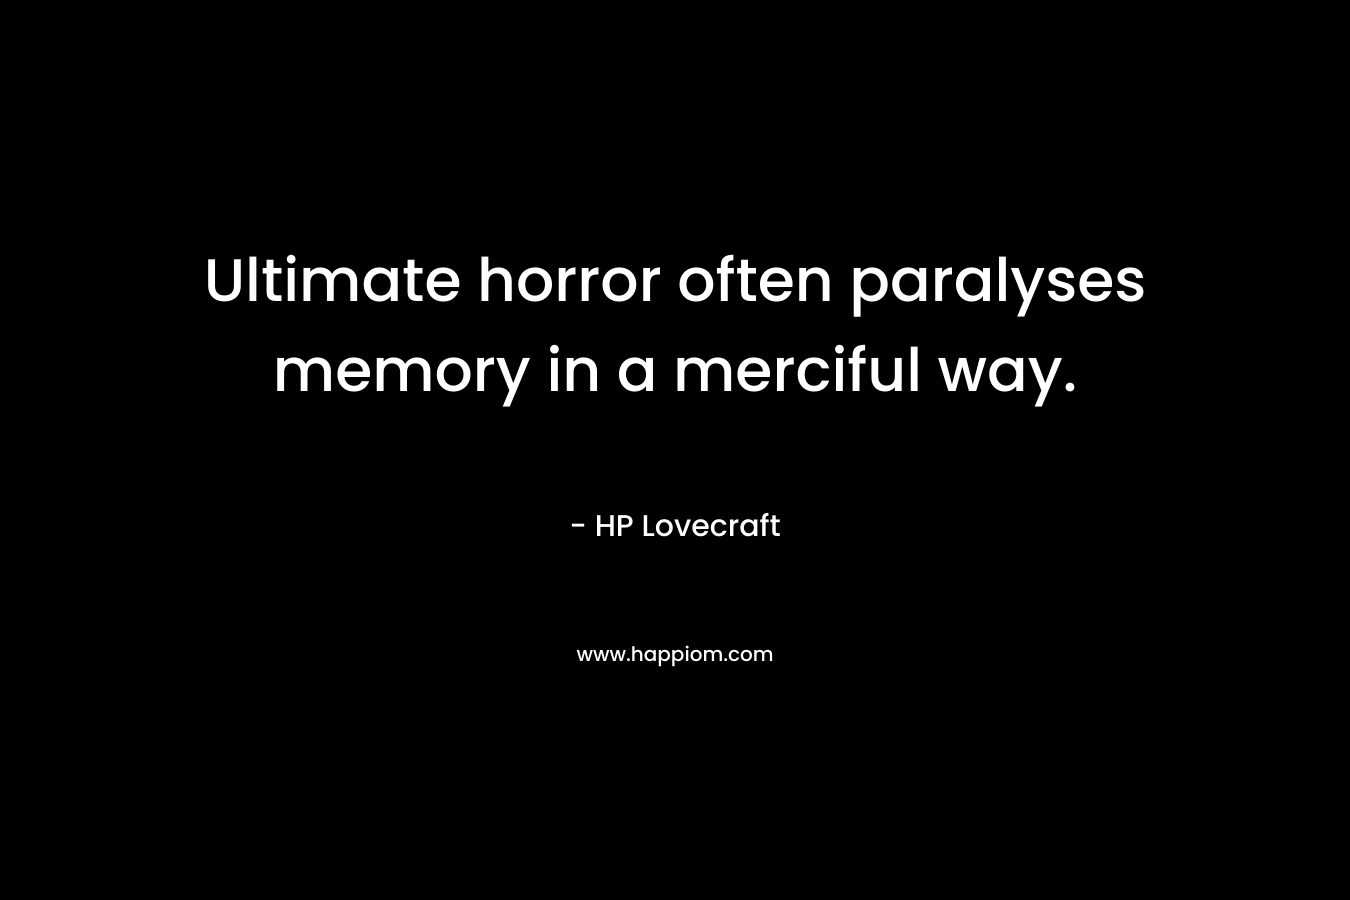 Ultimate horror often paralyses memory in a merciful way. – HP Lovecraft